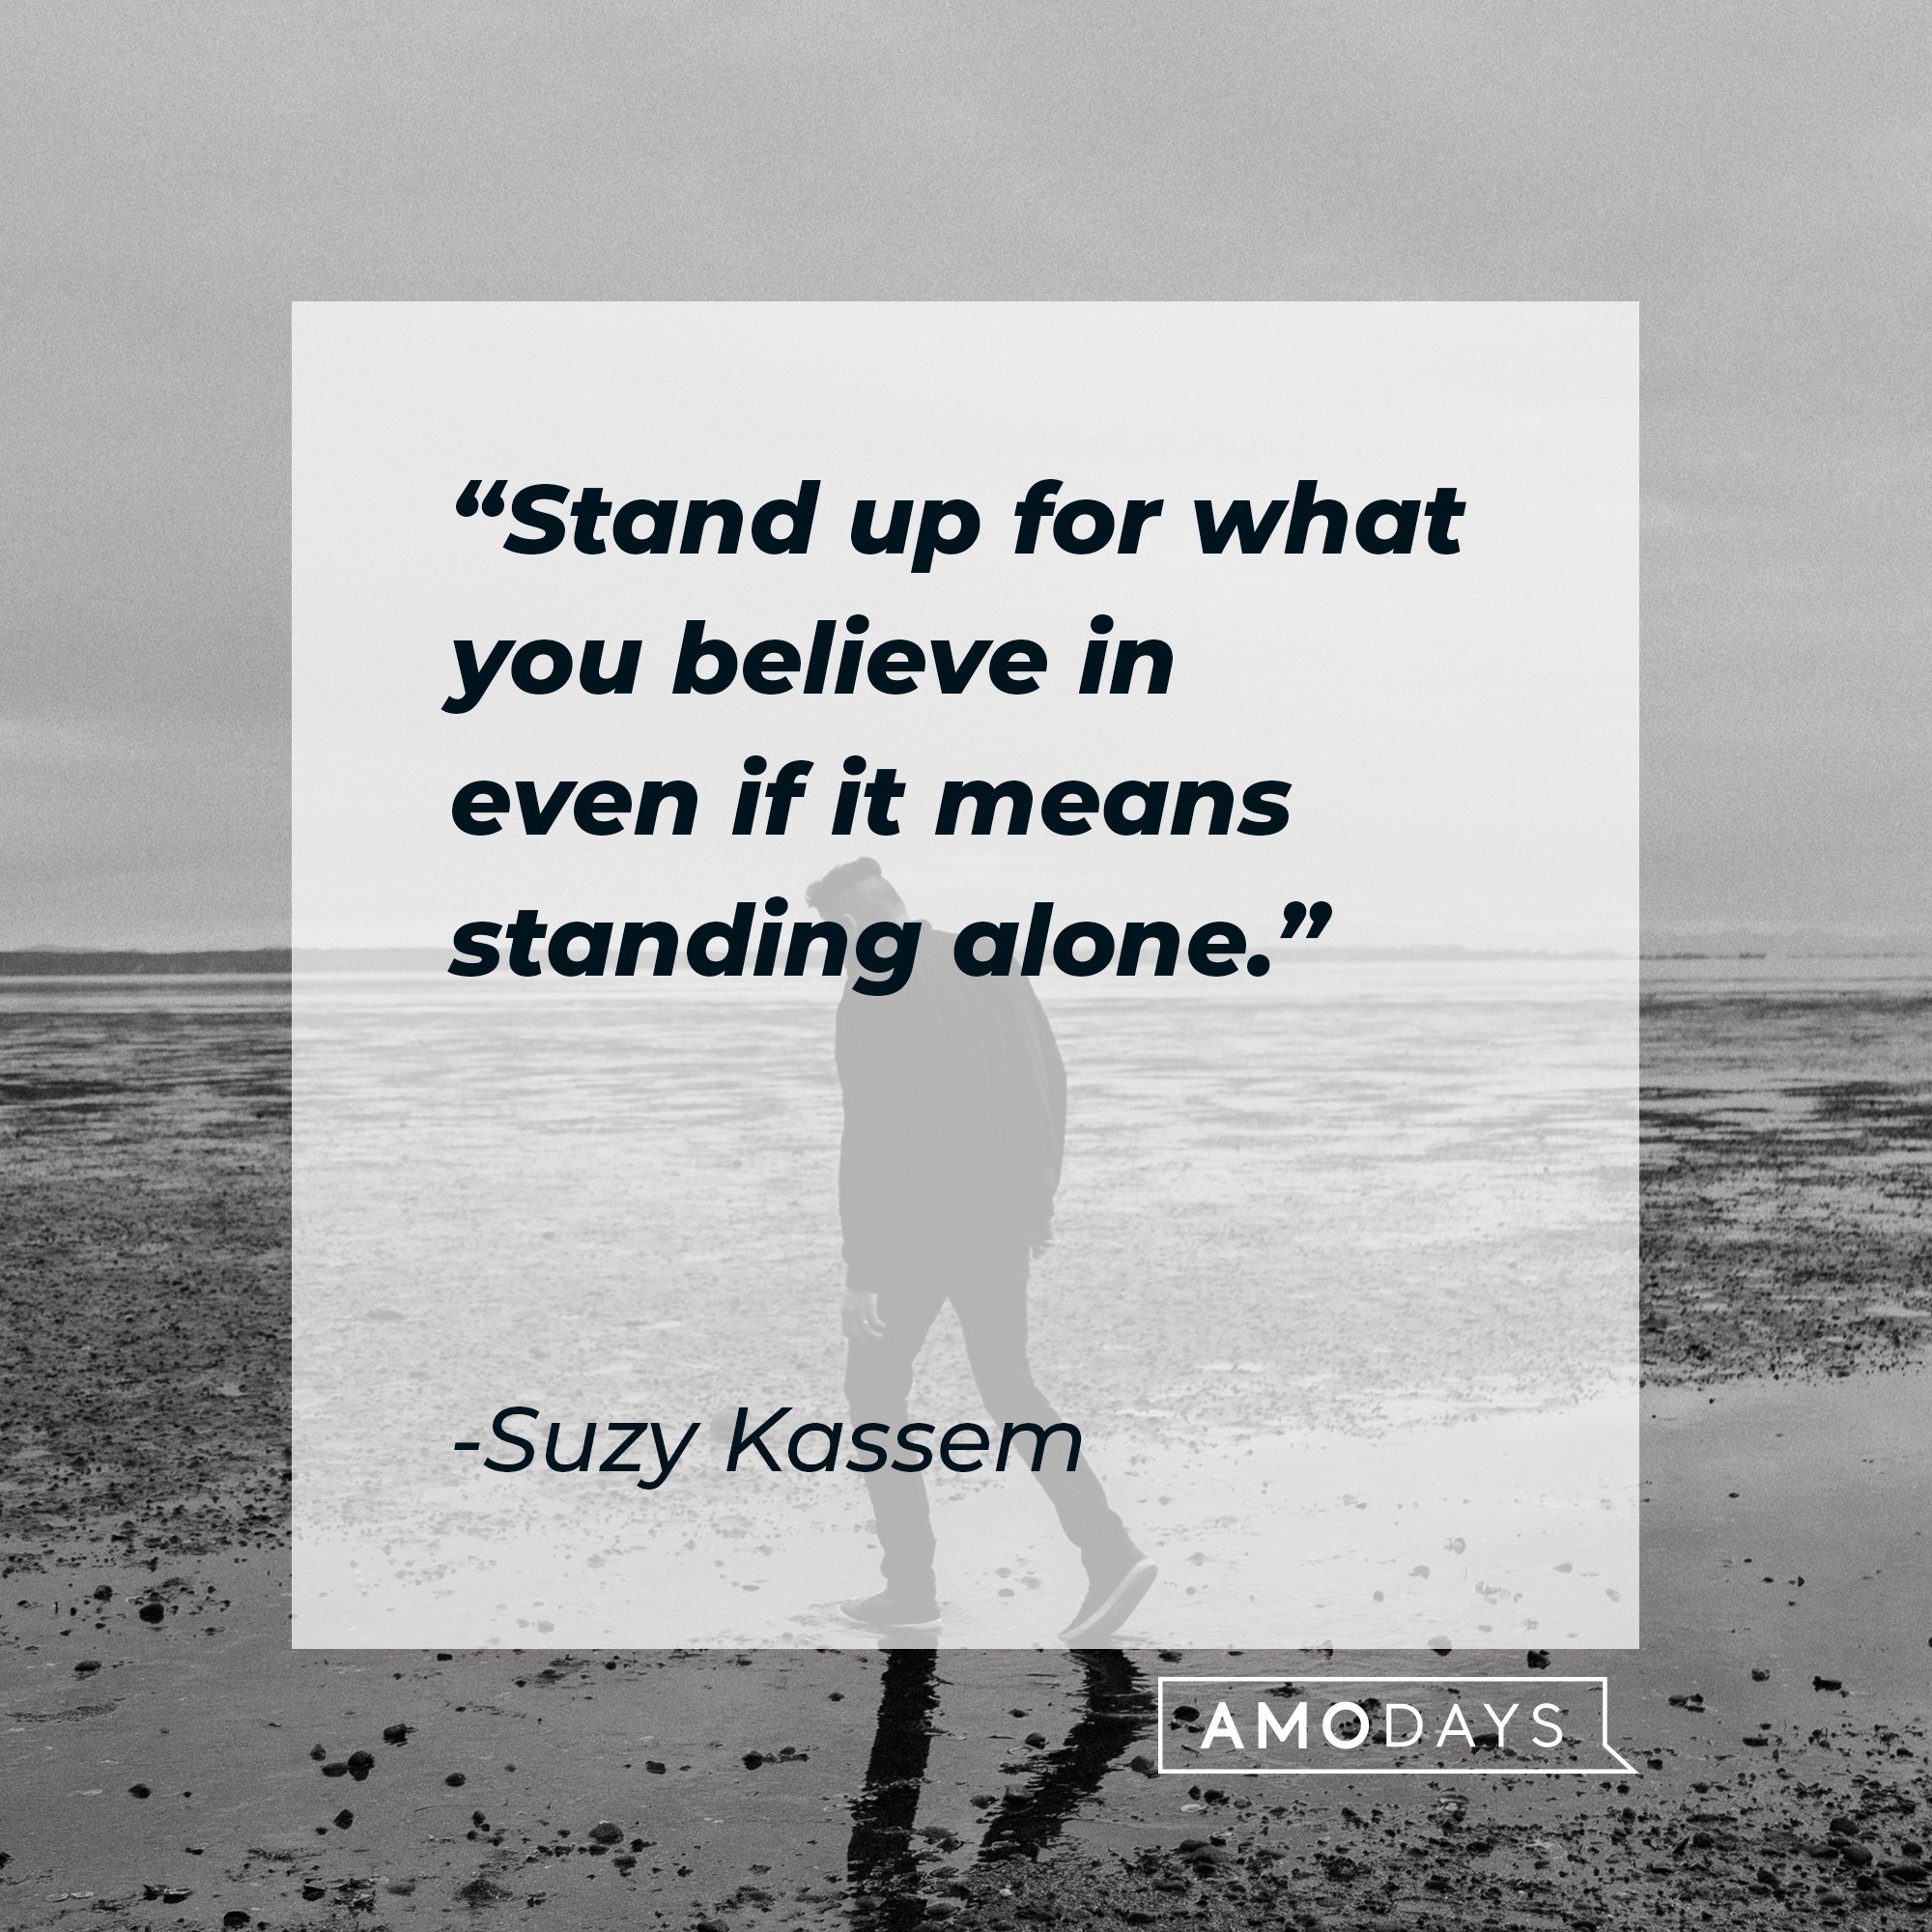 Suzy Kassem’s quote: "Stand up for what you believe in even if it means standing alone." | Image: AmoDays